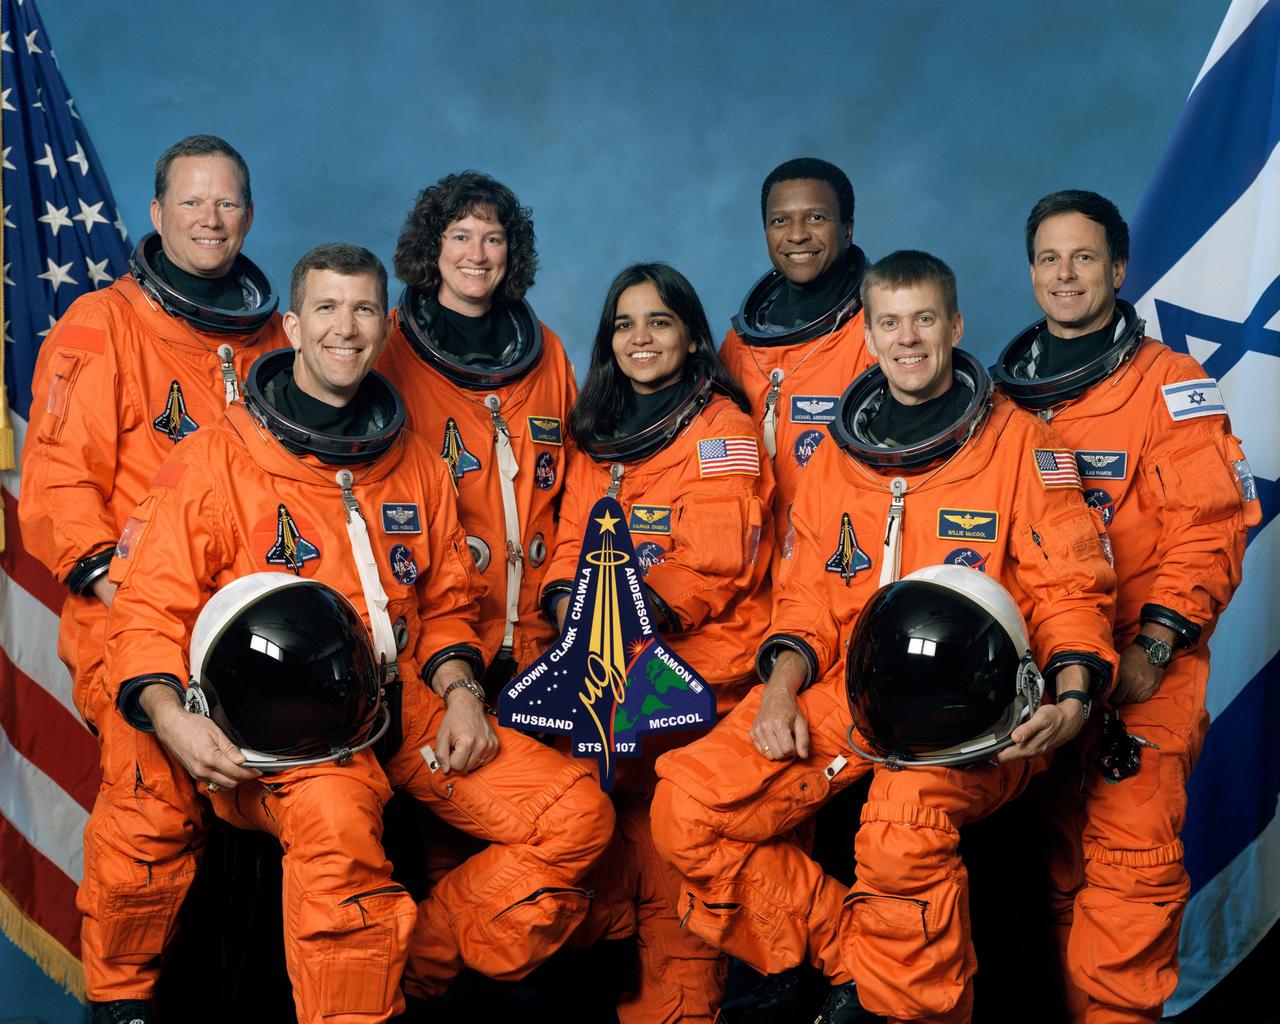 The crew of STS-107, in their official NASA portrait before their mission. (Source: NASA)